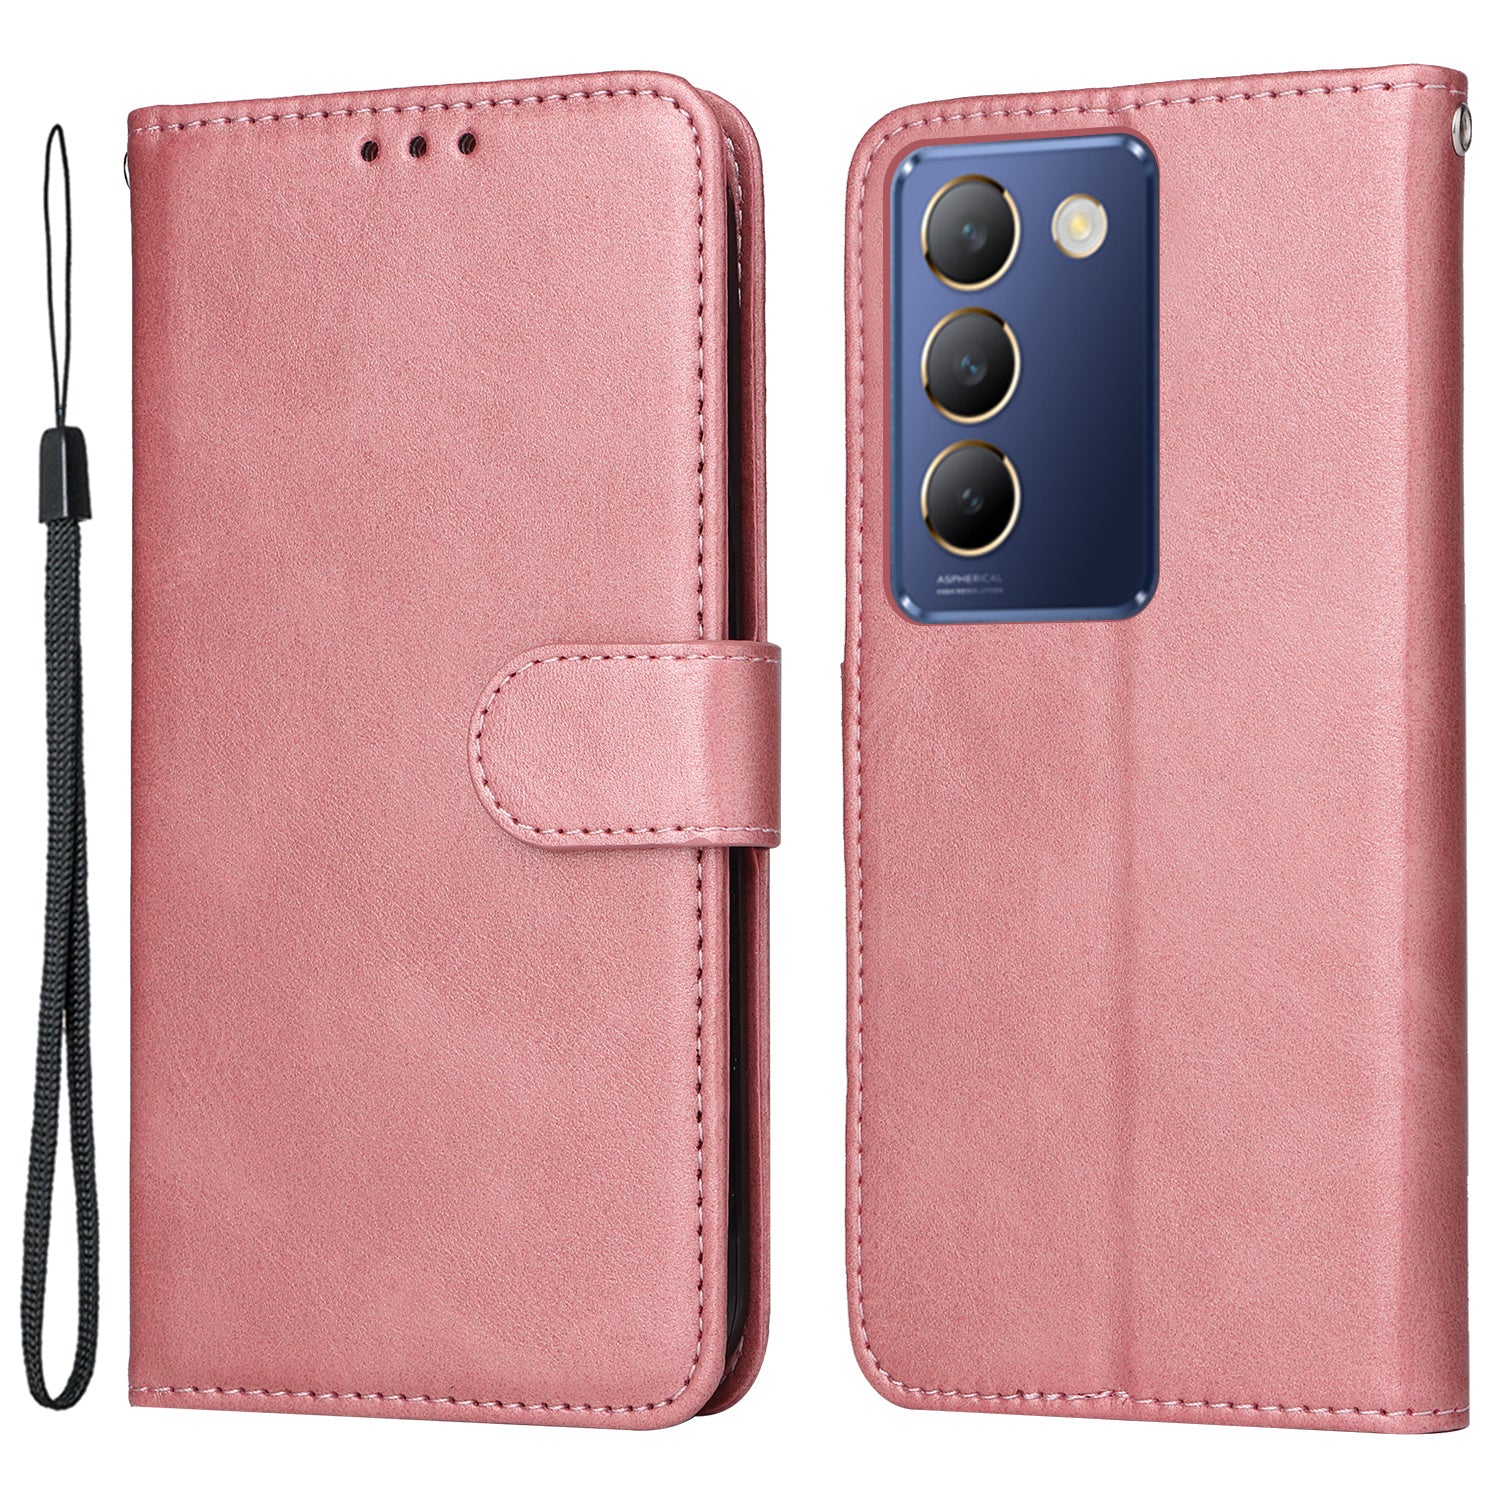 For vivo Y100 5G (Indonesia) / Y200e 5G / T3 5G (India) / V30 Lite 5G (India) Magnetic Case Leather Viewing Stand Phone Cover - Pink